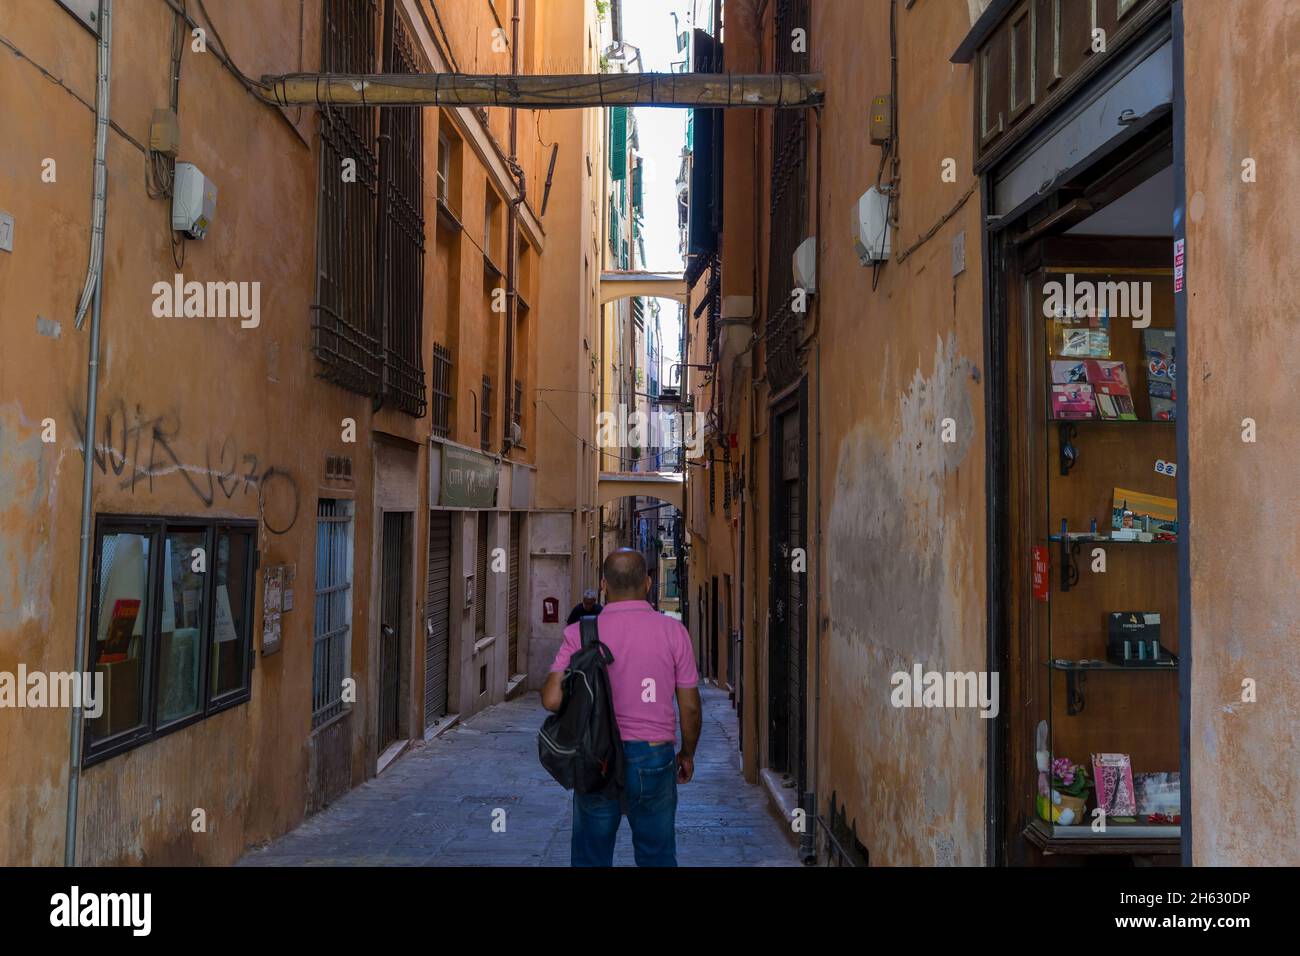 just some street photography in the city of genova (genoa),the capital of liguria region in italy Stock Photo